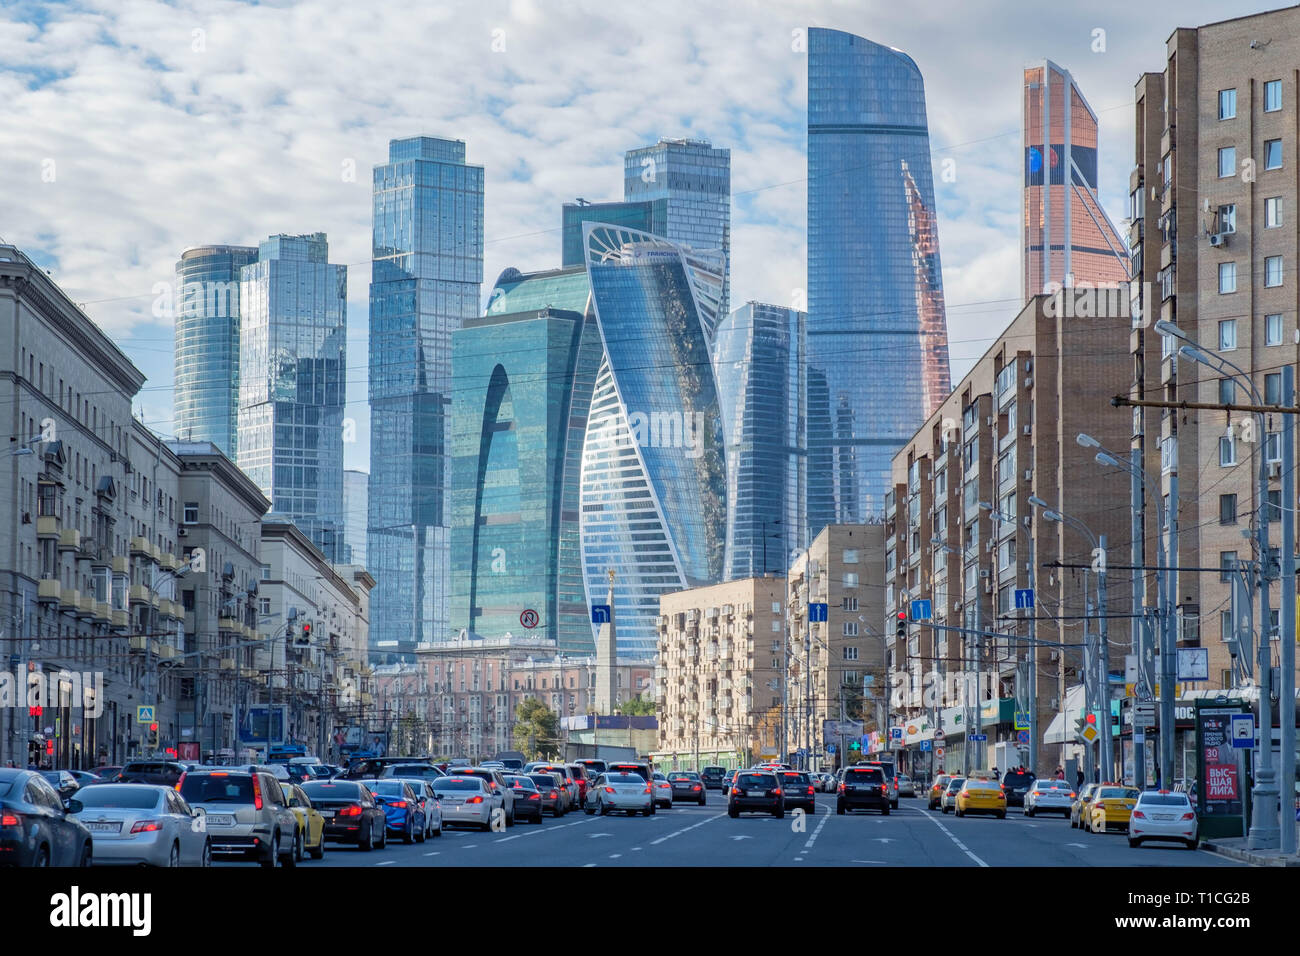 Moscow - 29 september 2018: City landscape with Moscow-City skyscrapers on background. Stock Photo